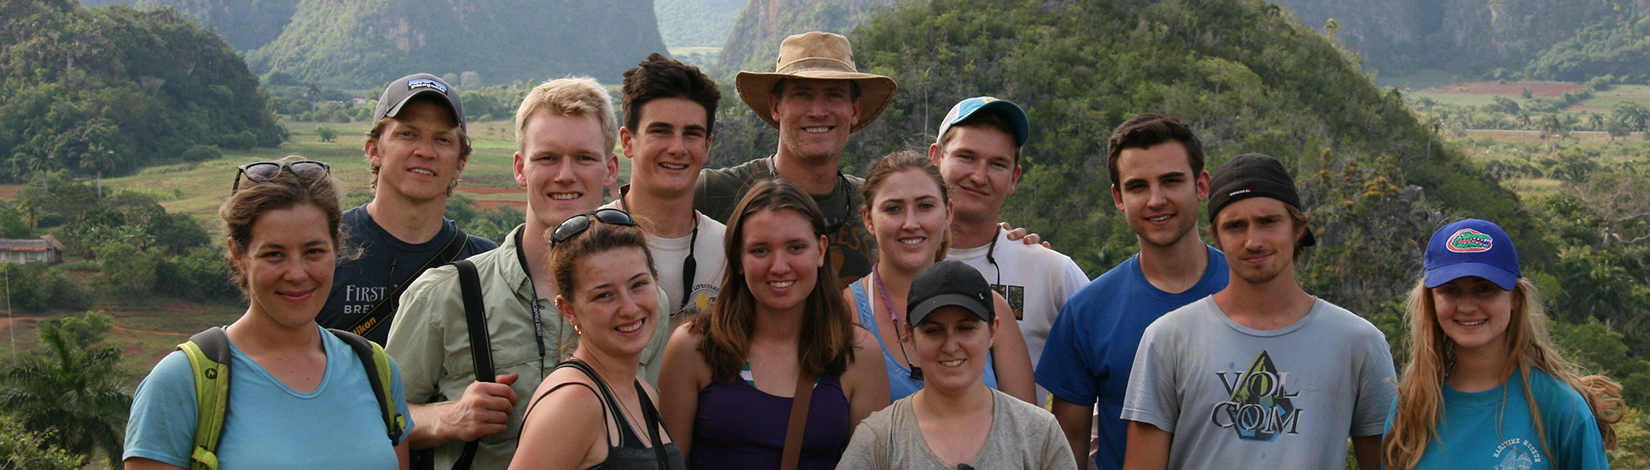 Thirteen UF students studying abroad in Cuba pose for a picture in front of Cuba's tropical ecological landscape.